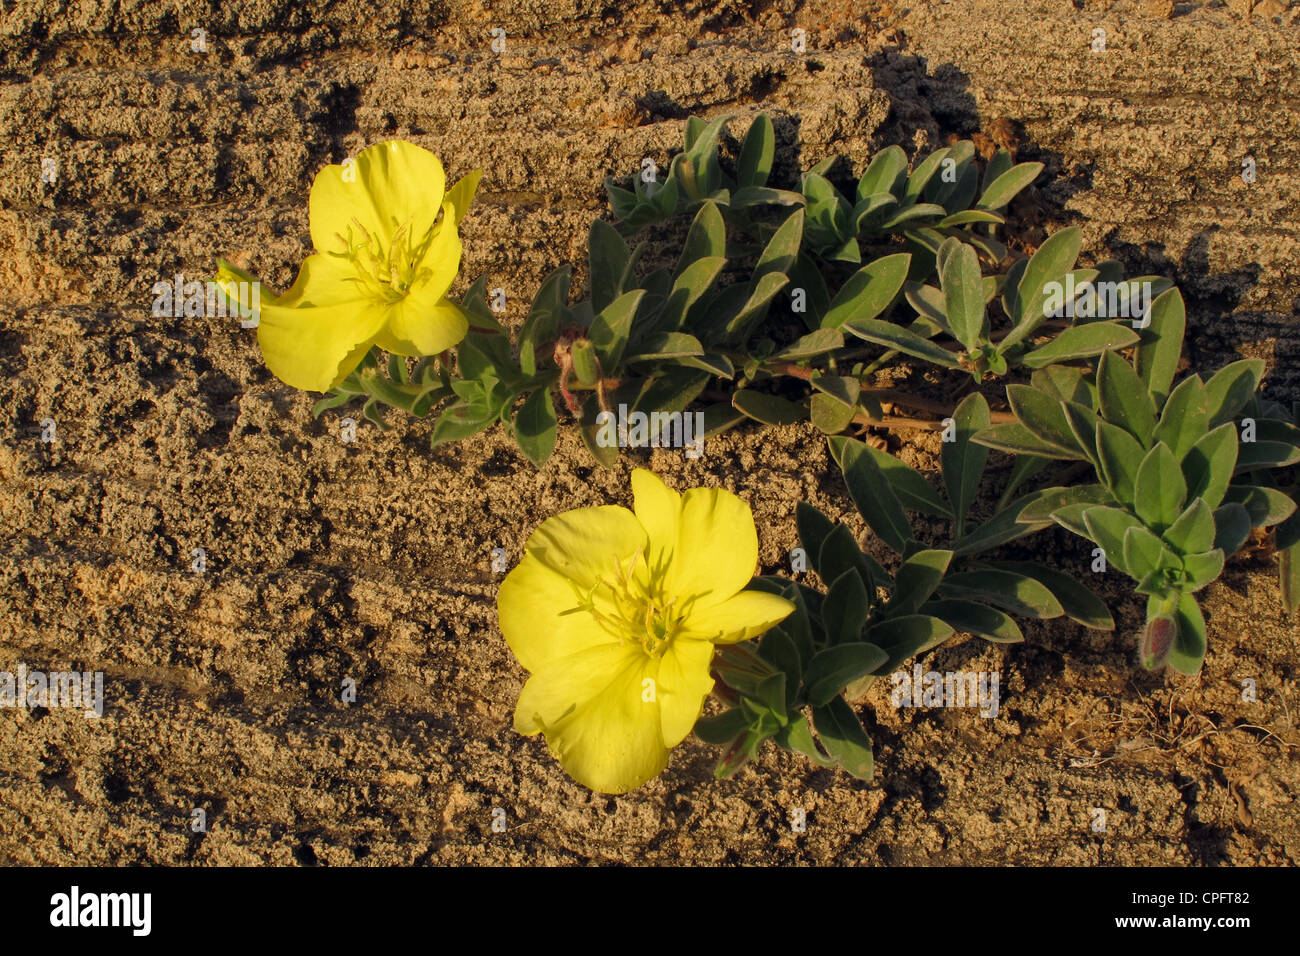 Oenothera drummondii flower also called evening-primrose, suncups, and sundrops. Stock Photo